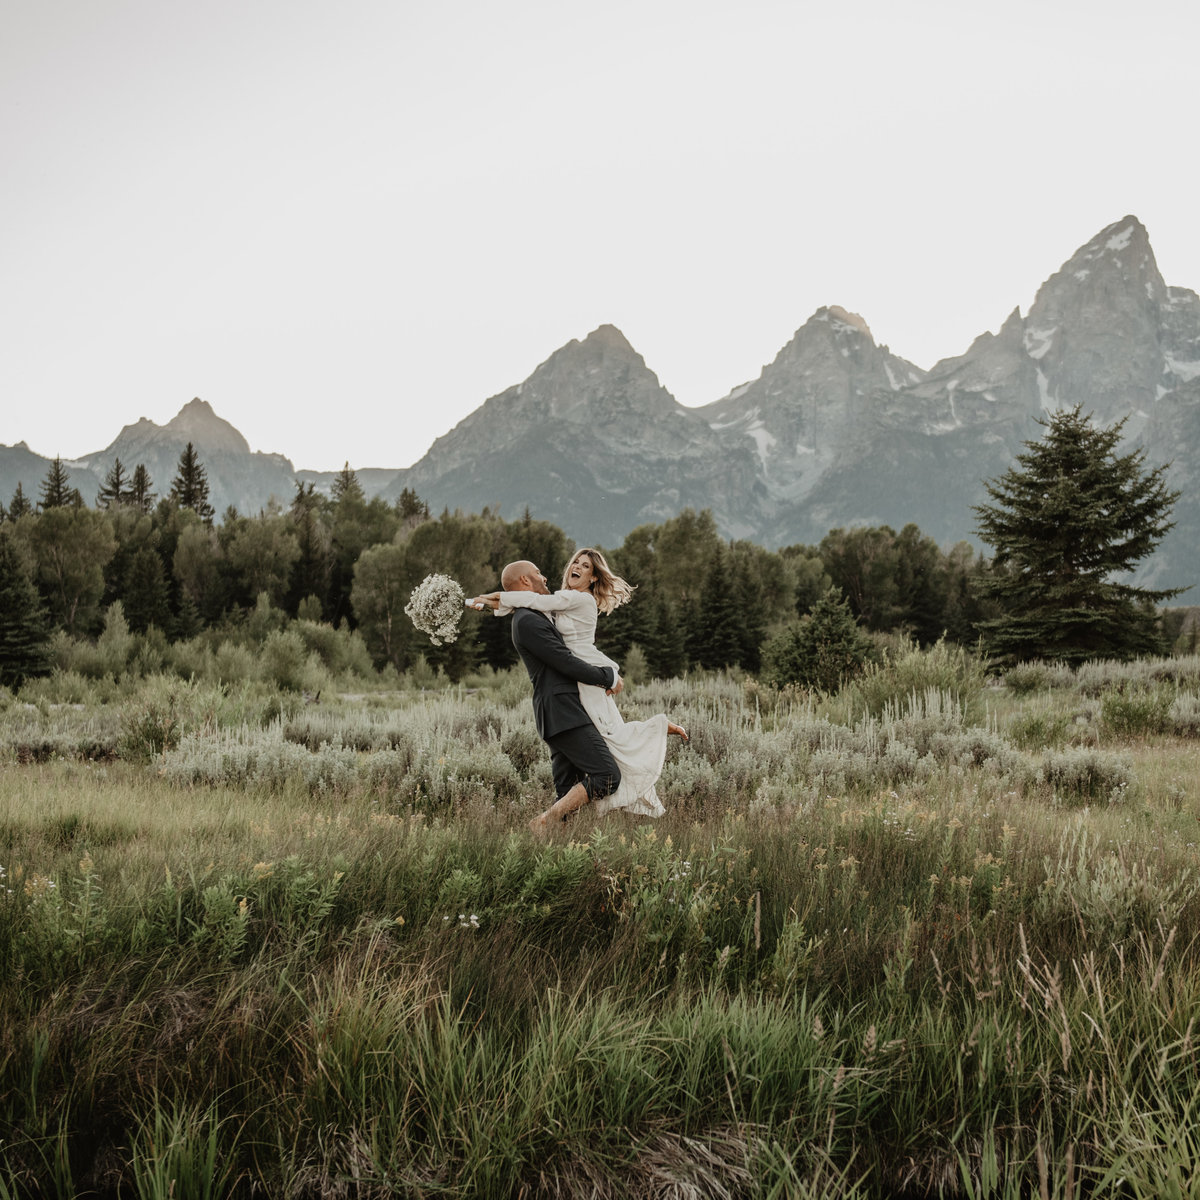 Teton elopement, groom picking up bride and twirling her in a field in front of the Tetons on their wedding day